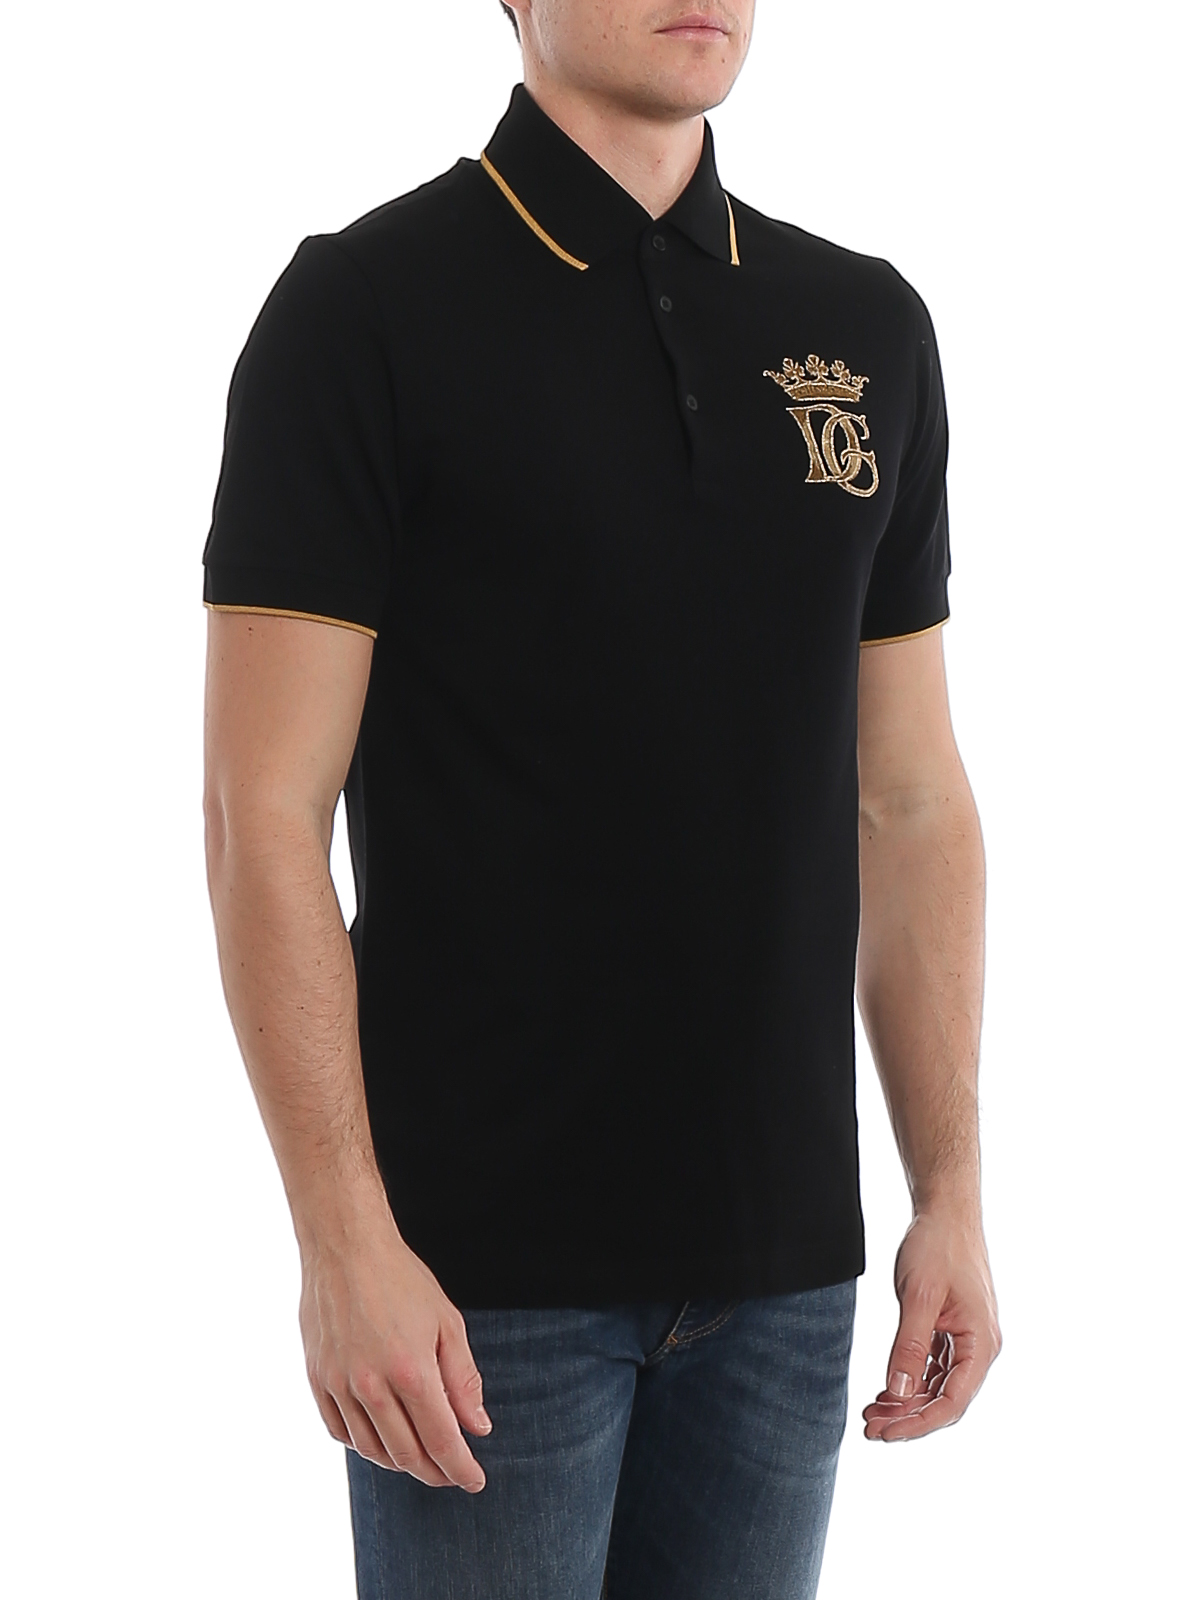 Top 63+ imagen dolce and gabbana polo t shirts - Abzlocal.mx